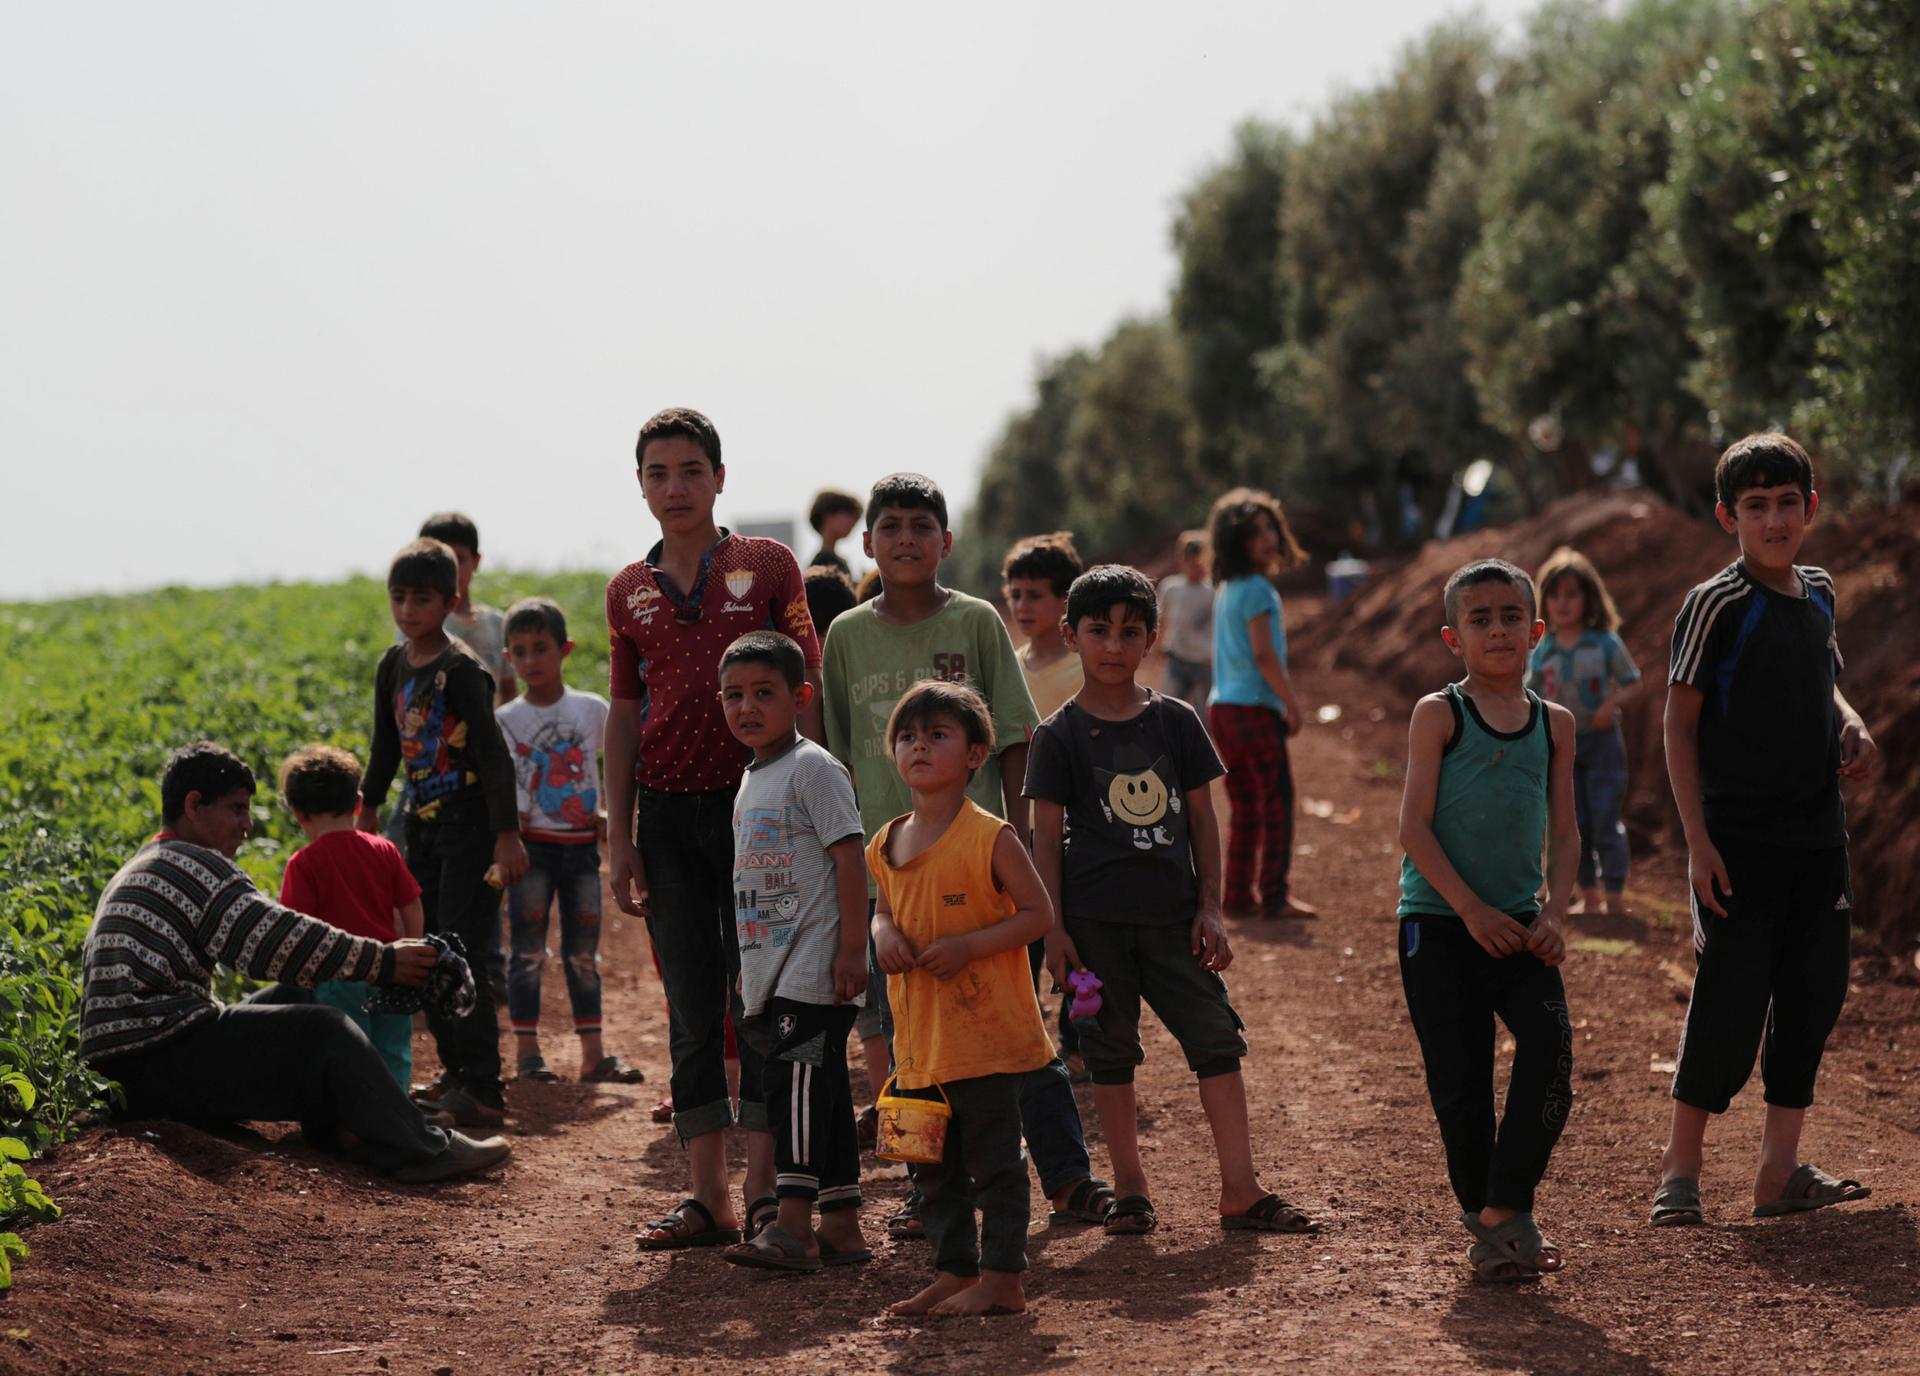 A group of more than a dozen children of varying age are shown standing in a dirt road next to a field.